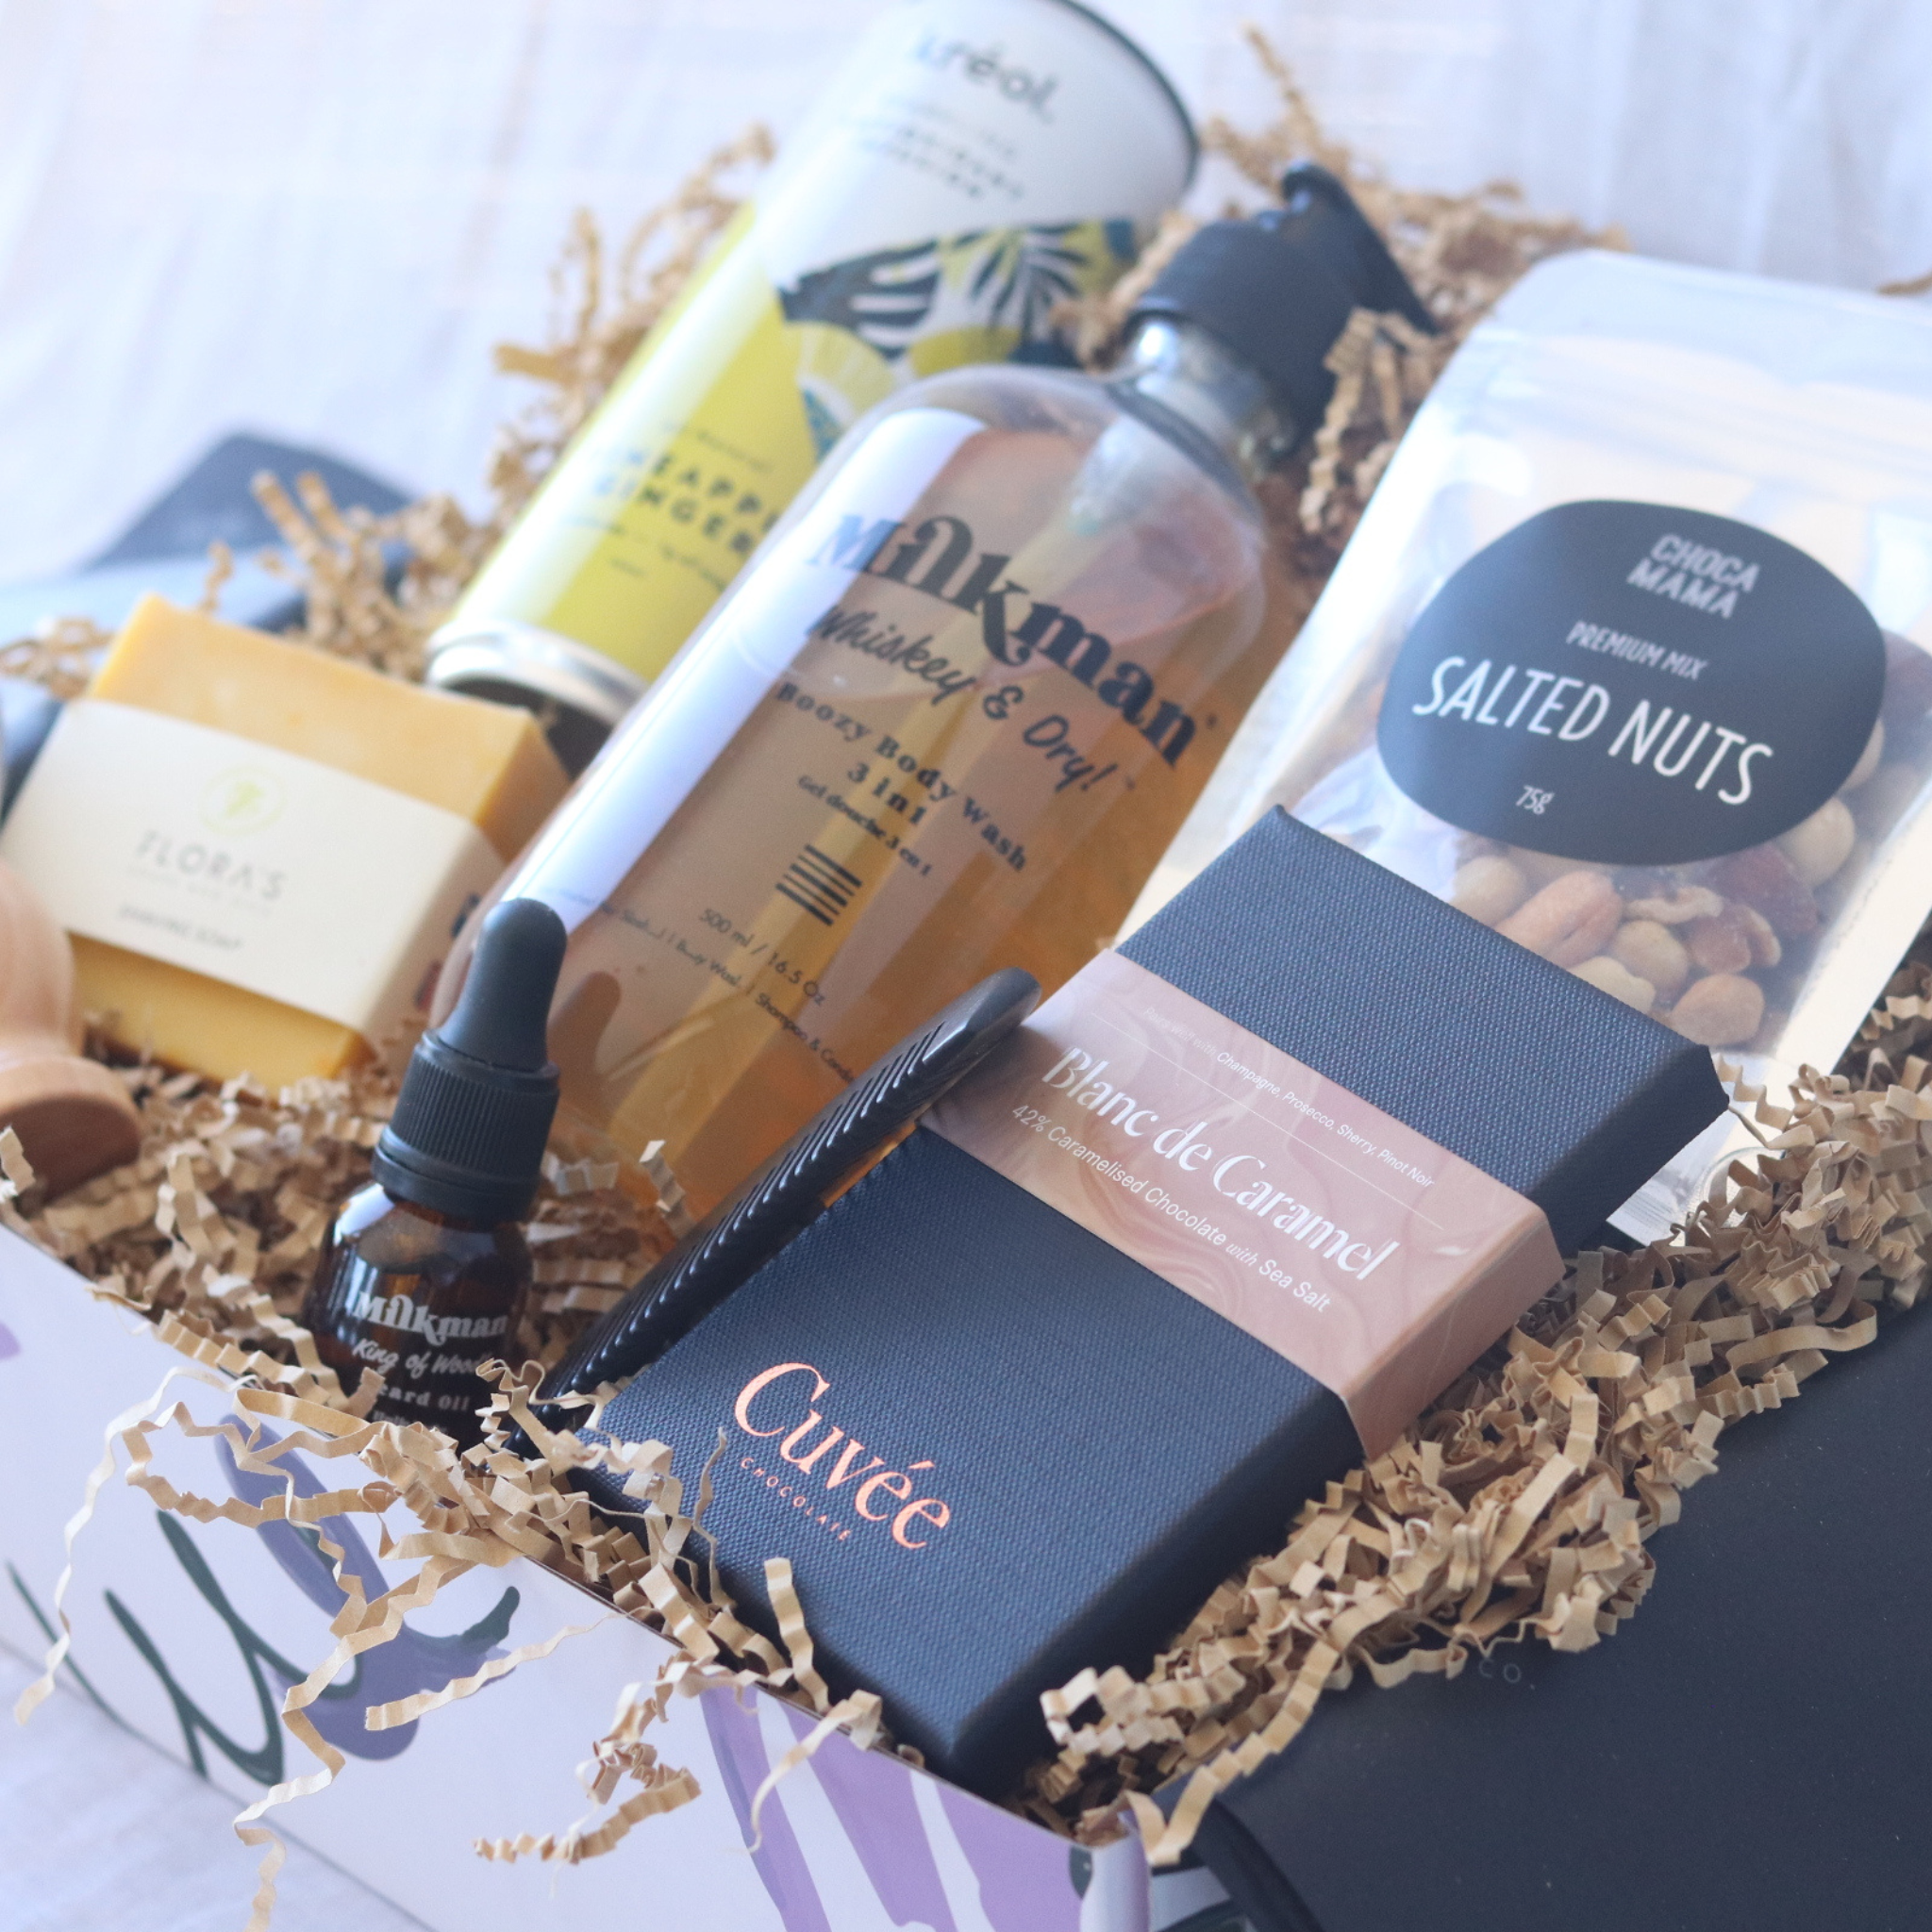 mens gift box made in sydney, pamper items and sweet treats